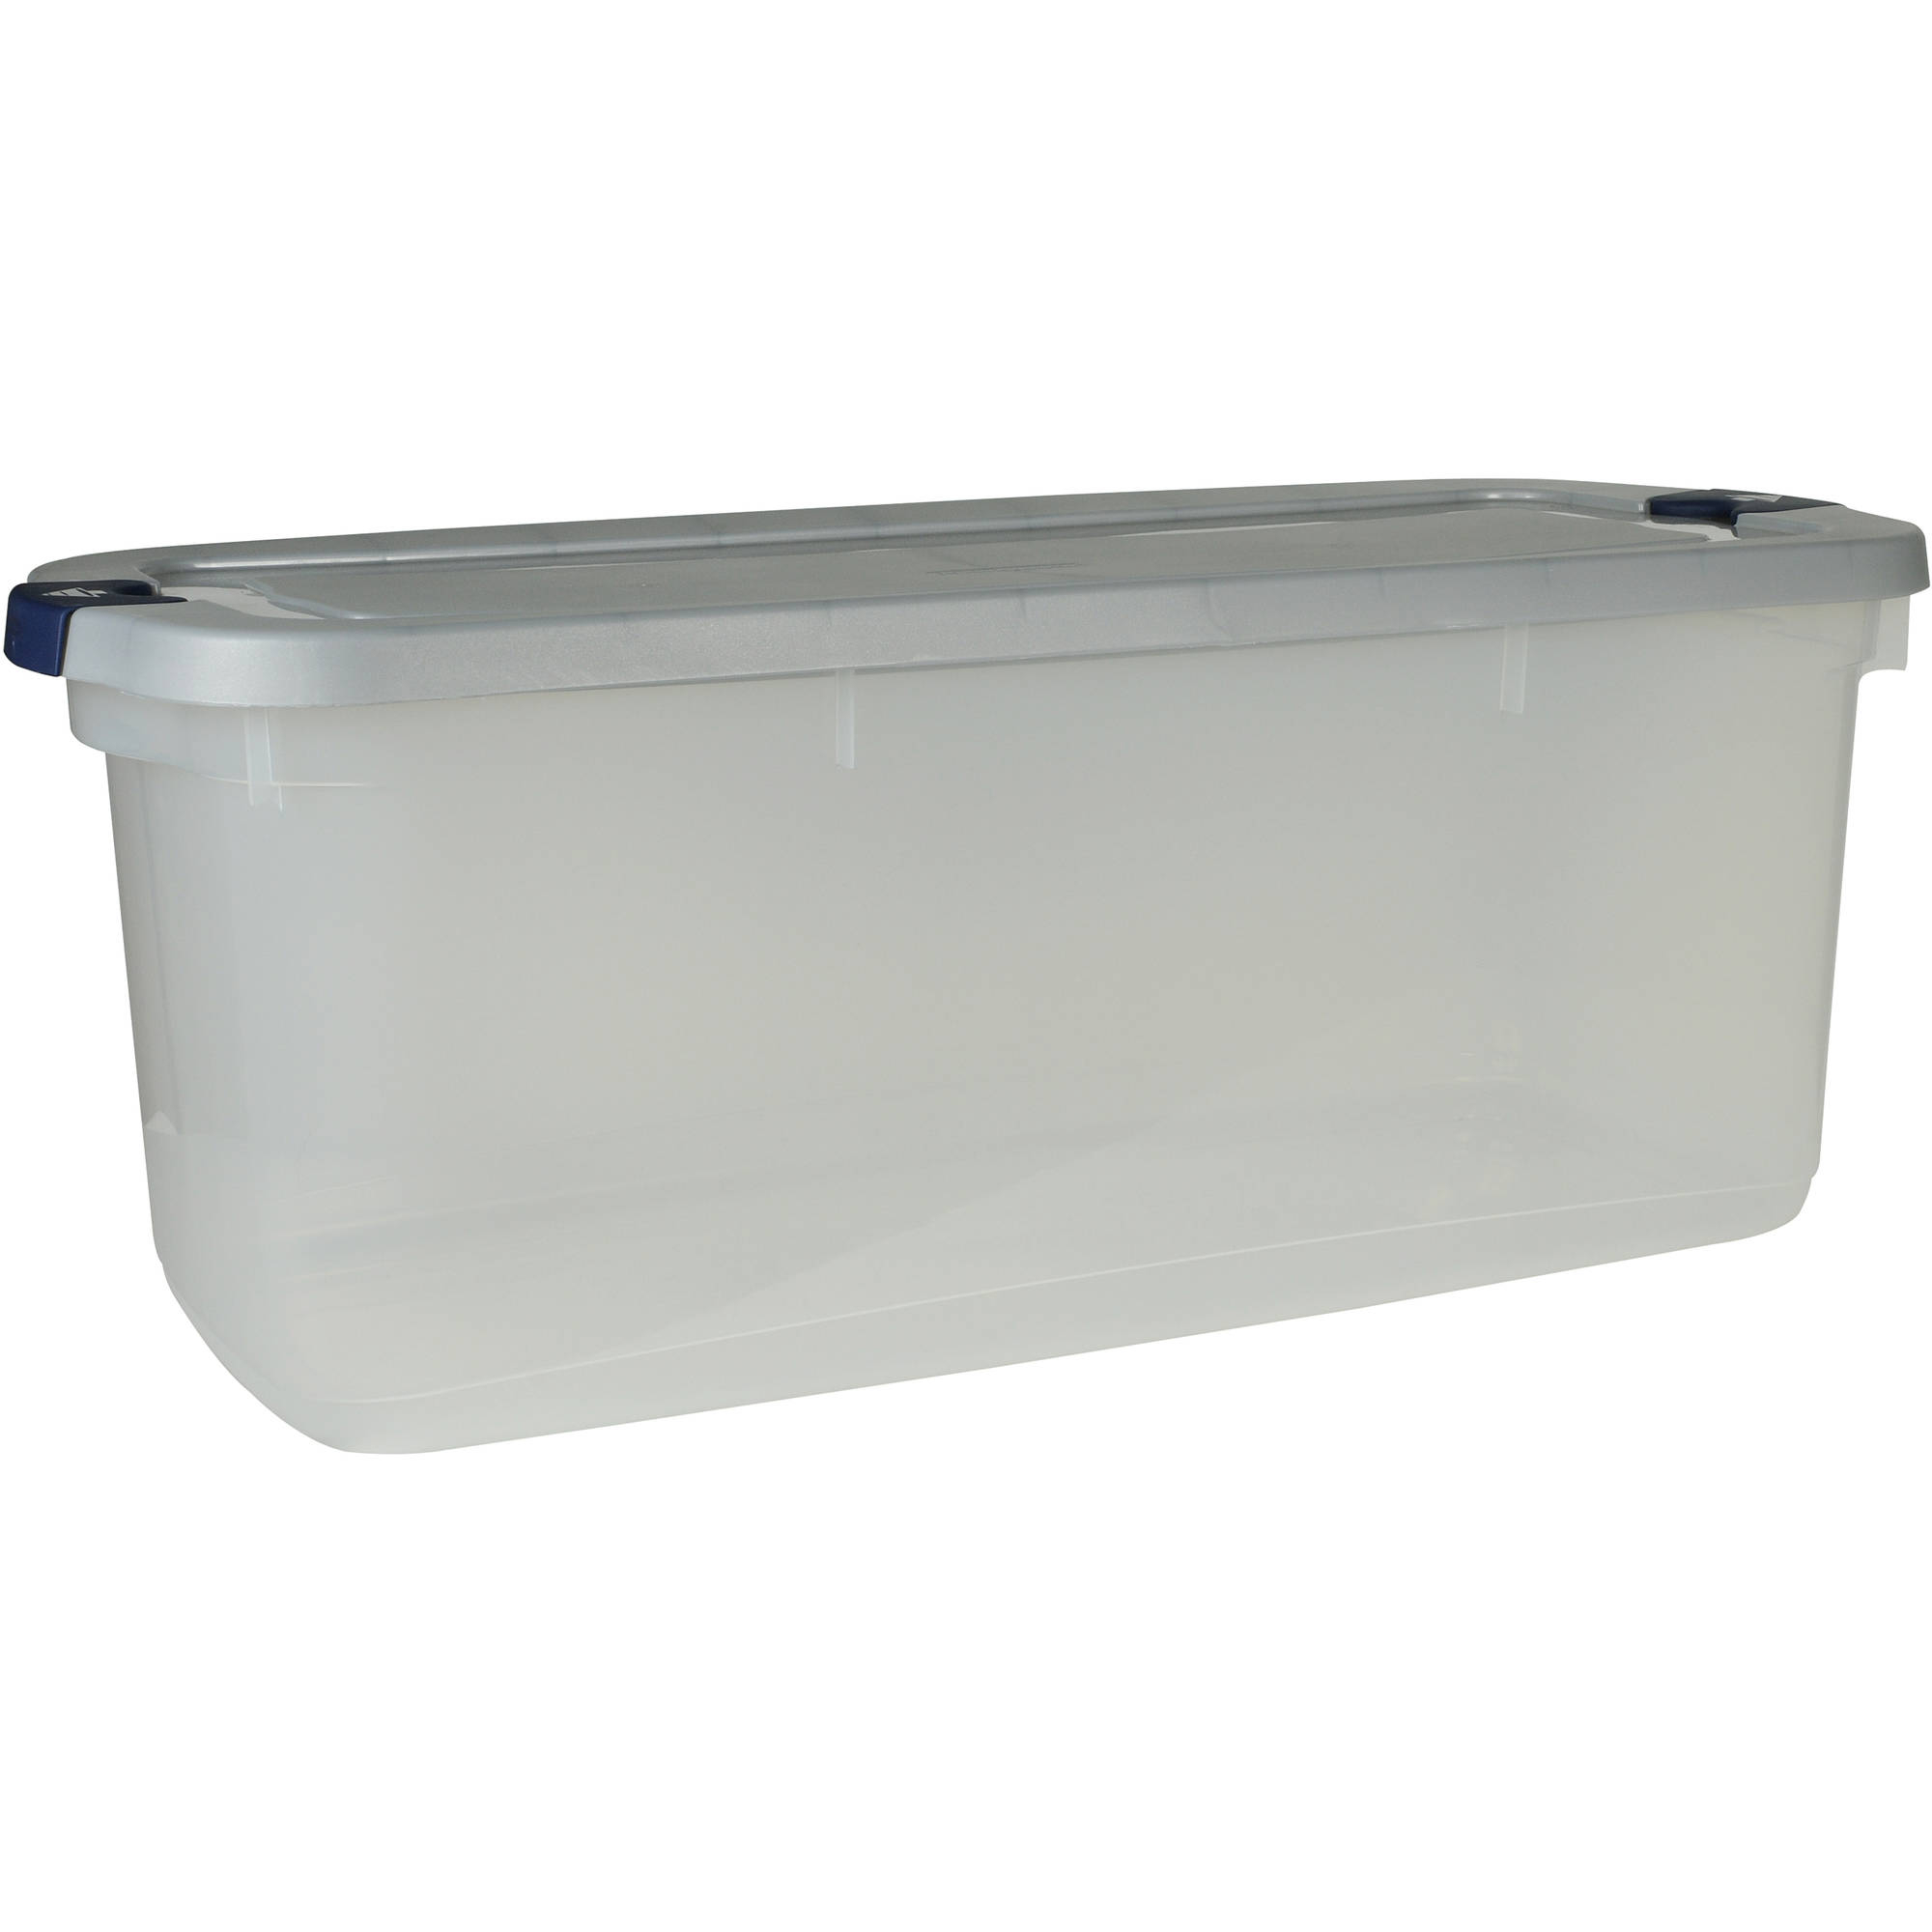 Rubbermaid Roughneck Clears Storage Tote Bins 95 Qt 2375 Gal with dimensions 2000 X 2000